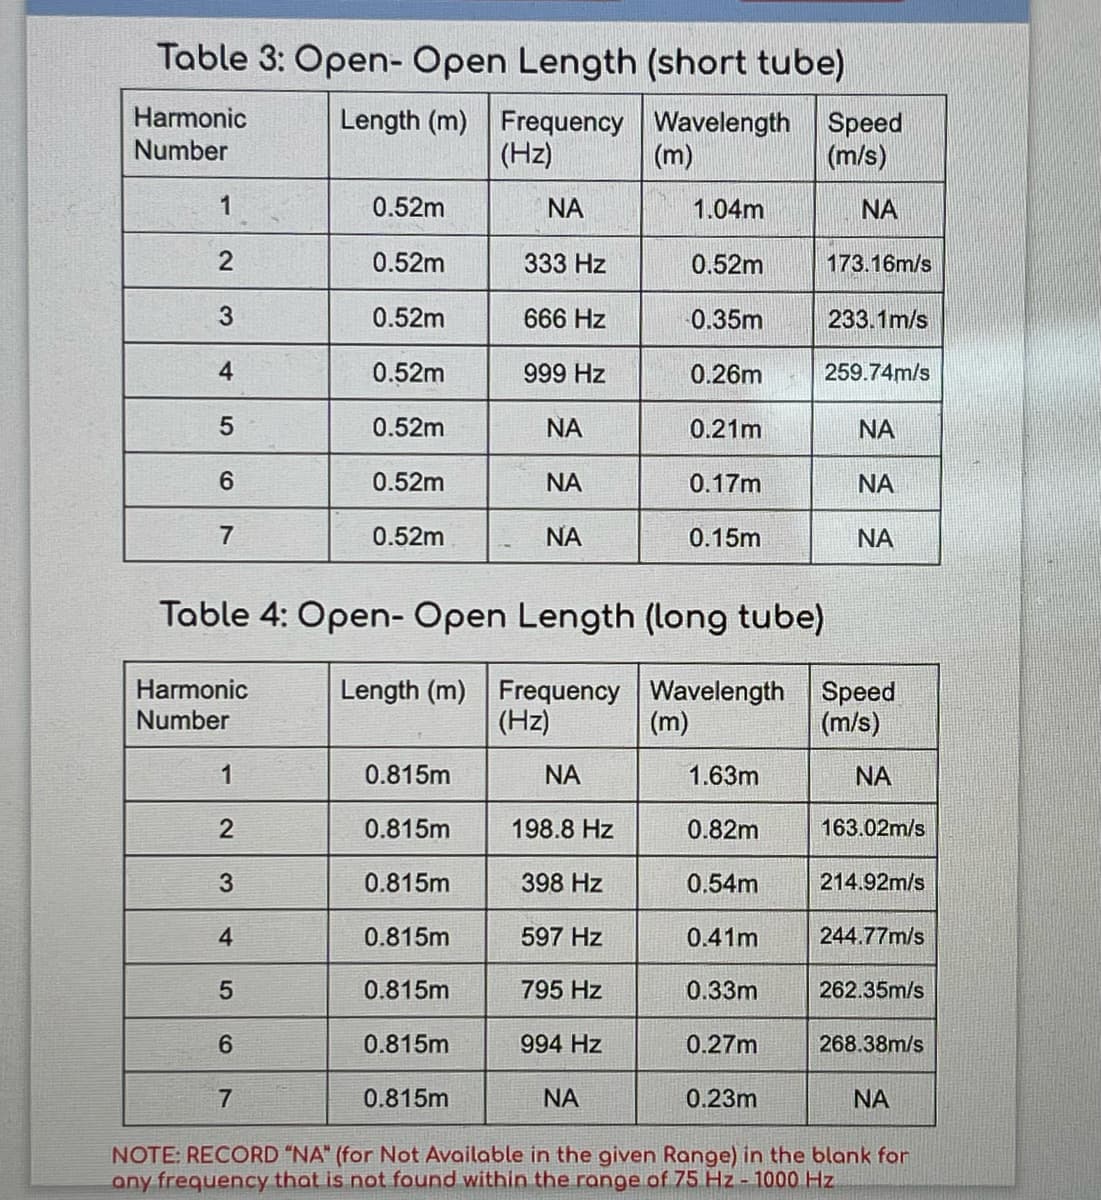 Table 3: Open- Open Length (short tube)
Harmonic
Length (m)
Frequency
(Hz)
Wavelength Speed
(m)
Number
(m/s)
1
0.52m
NA
1.04m
NA
0.52m
333 Hz
0.52m
173.16m/s
3
0.52m
666 Hz
0.35m
233.1m/s
0.52m
999 Hz
0.26m
259.74m/s
0.52m
NA
0.21m
NA
6
0.52m
NA
0.17m
NA
7
0.52m
NA
0.15m
NA
Table 4: Open- Open Length (long tube)
Harmonic
Length (m)
Frequency Wavelength Speed
(m)
Number
(Hz)
(m/s)
1
0.815m
NA
1.63m
NA
0.815m
198.8 Hz
0.82m
163.02m/s
3
0.815m
398 Hz
0.54m
214.92m/s
4
0.815m
597 Hz
0.41m
244.77m/s
0.815m
795 Hz
0.33m
262.35m/s
0.815m
994 Hz
0.27m
268.38m/s
0.815m
NA
0.23m
NA
NOTE: RECORD "NA" (for Not Available in the given Range) in the blank for
any frequency that is not found within the range of 75 Hz - 1000 Hz
